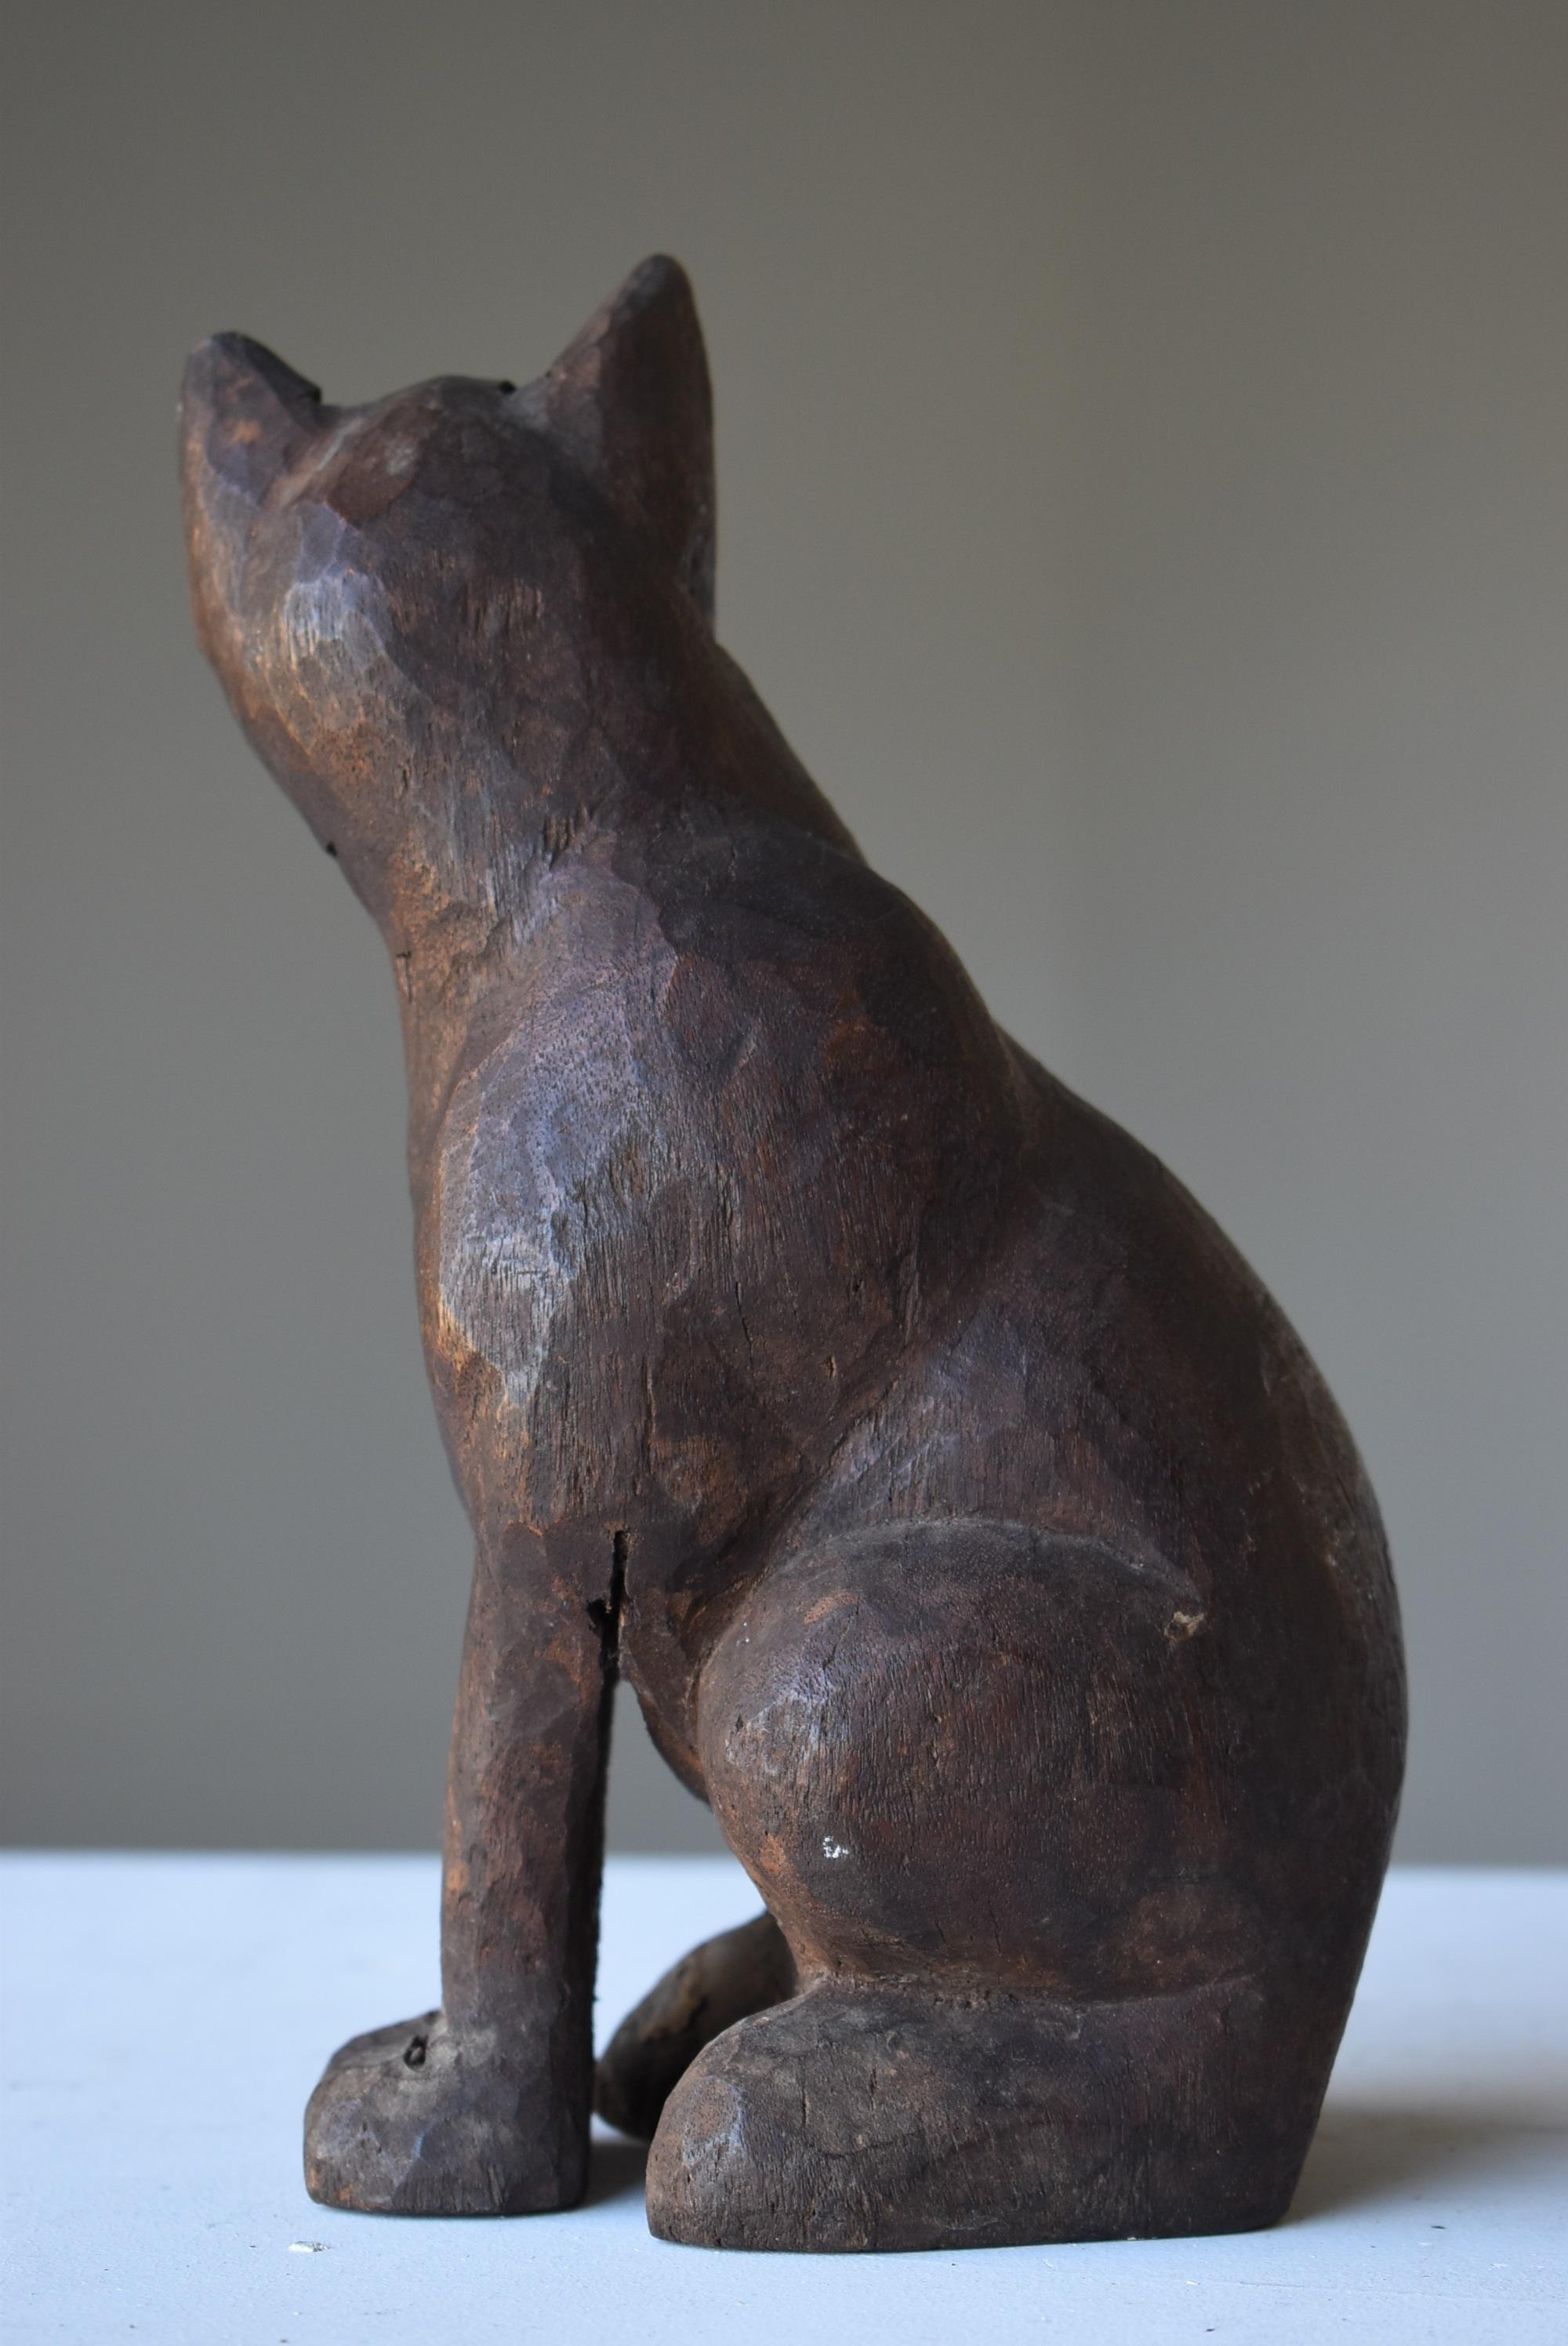 20th Century Japanese Antique Wood Carving Cat 1860s-1920s /Figurine Animal Sculpture Object